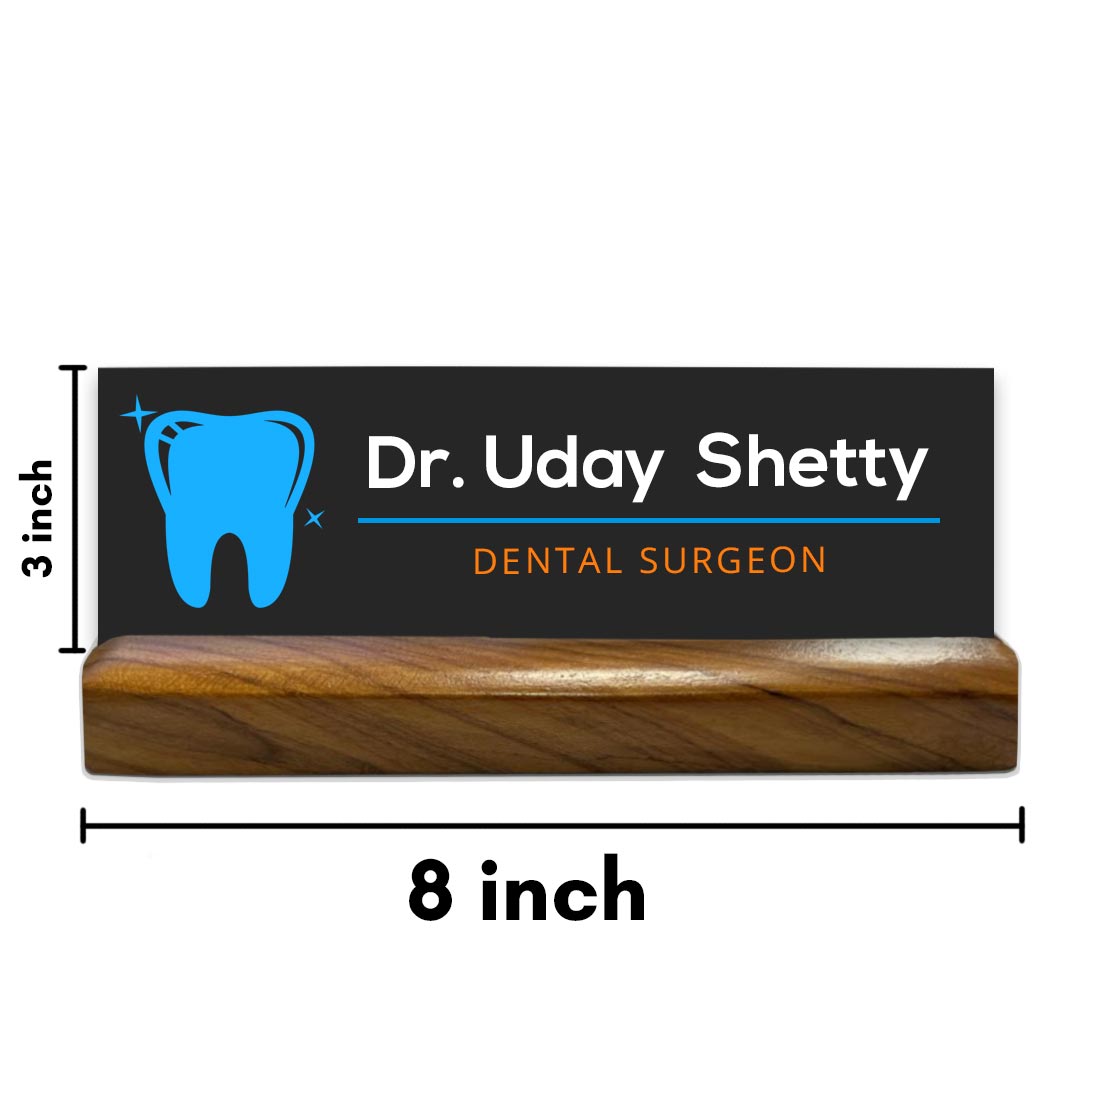 Personalized Engraved Name Plate Desk Office Table for Dentist